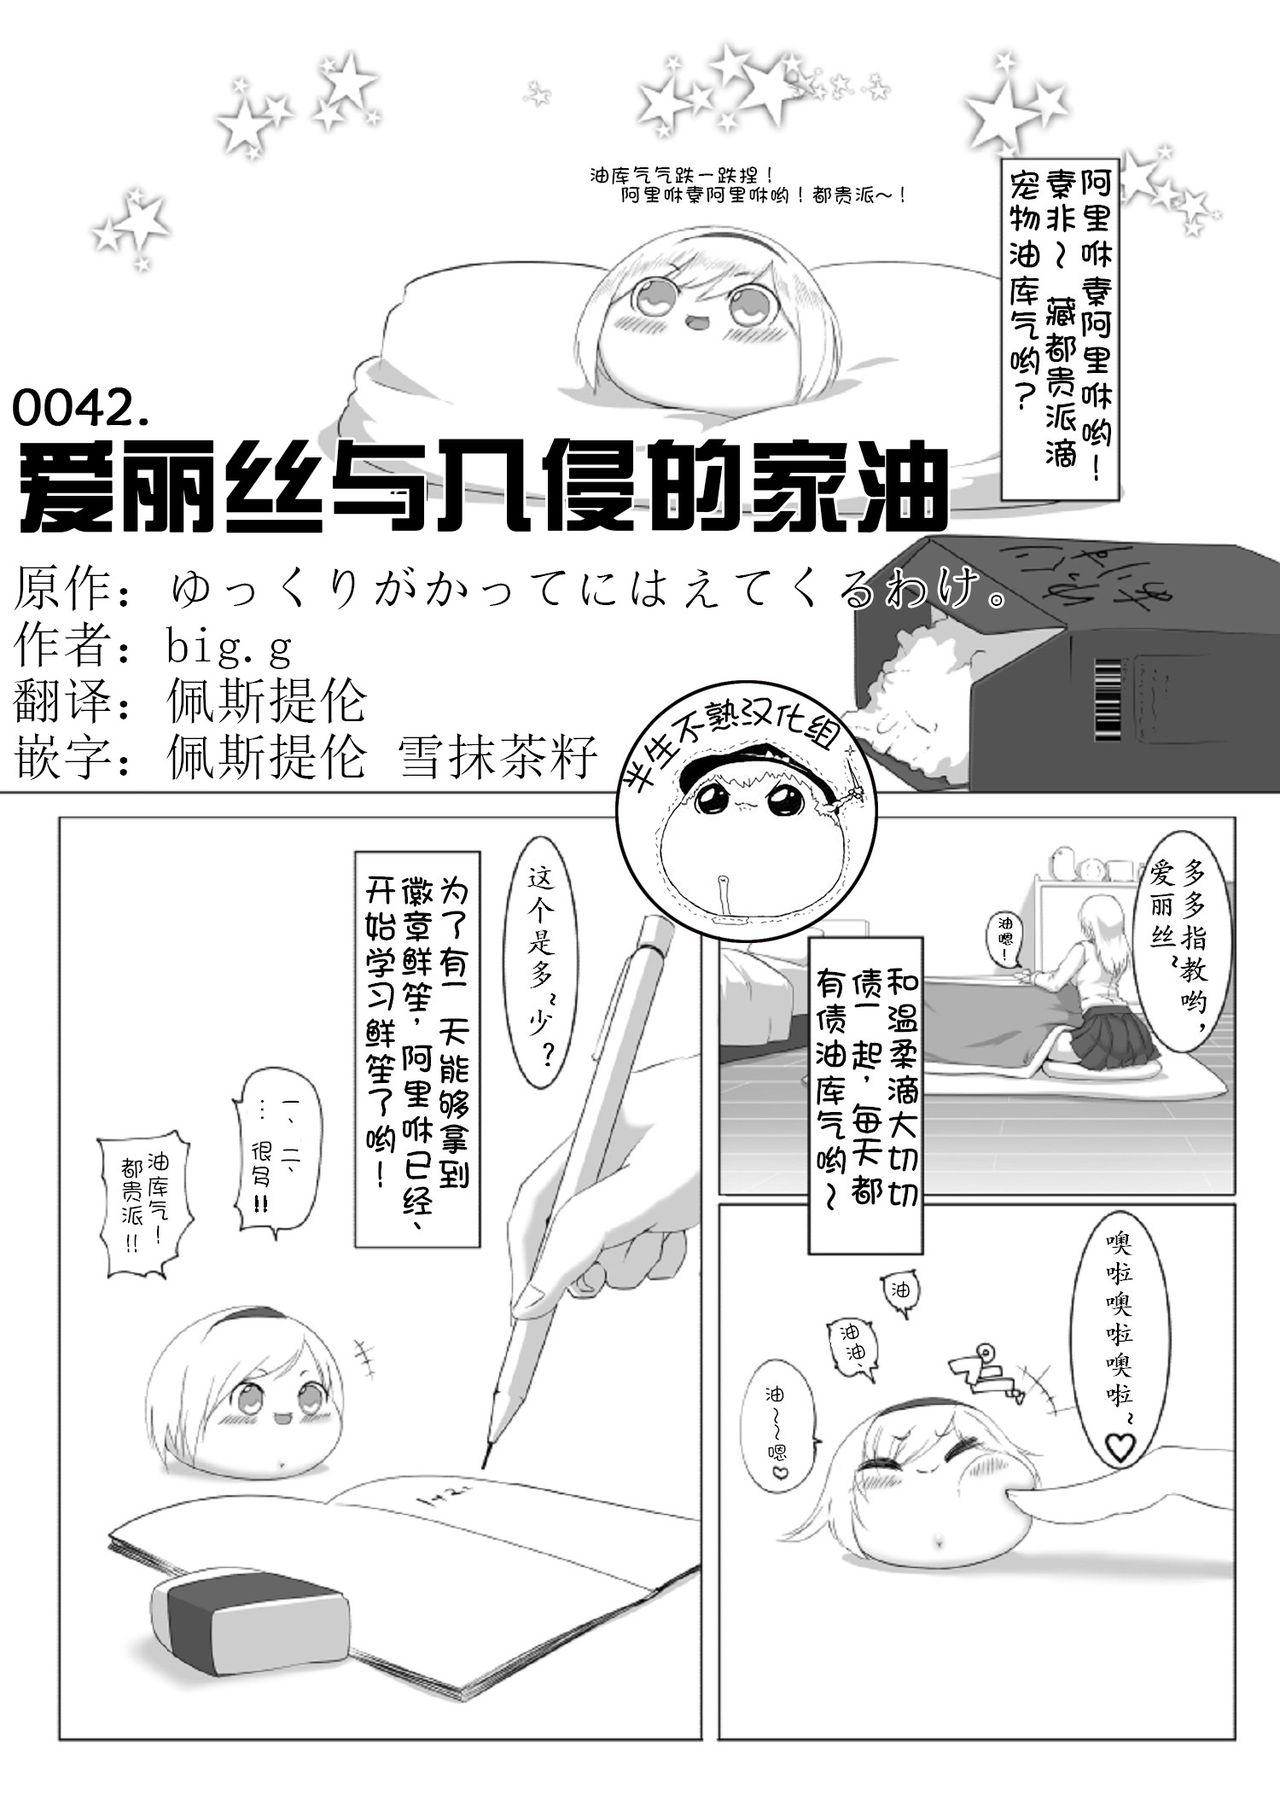 Camshow ゆっくりがかってにはえてくるわけ（Chinese) - Touhou project Amateur Pussy - Page 1